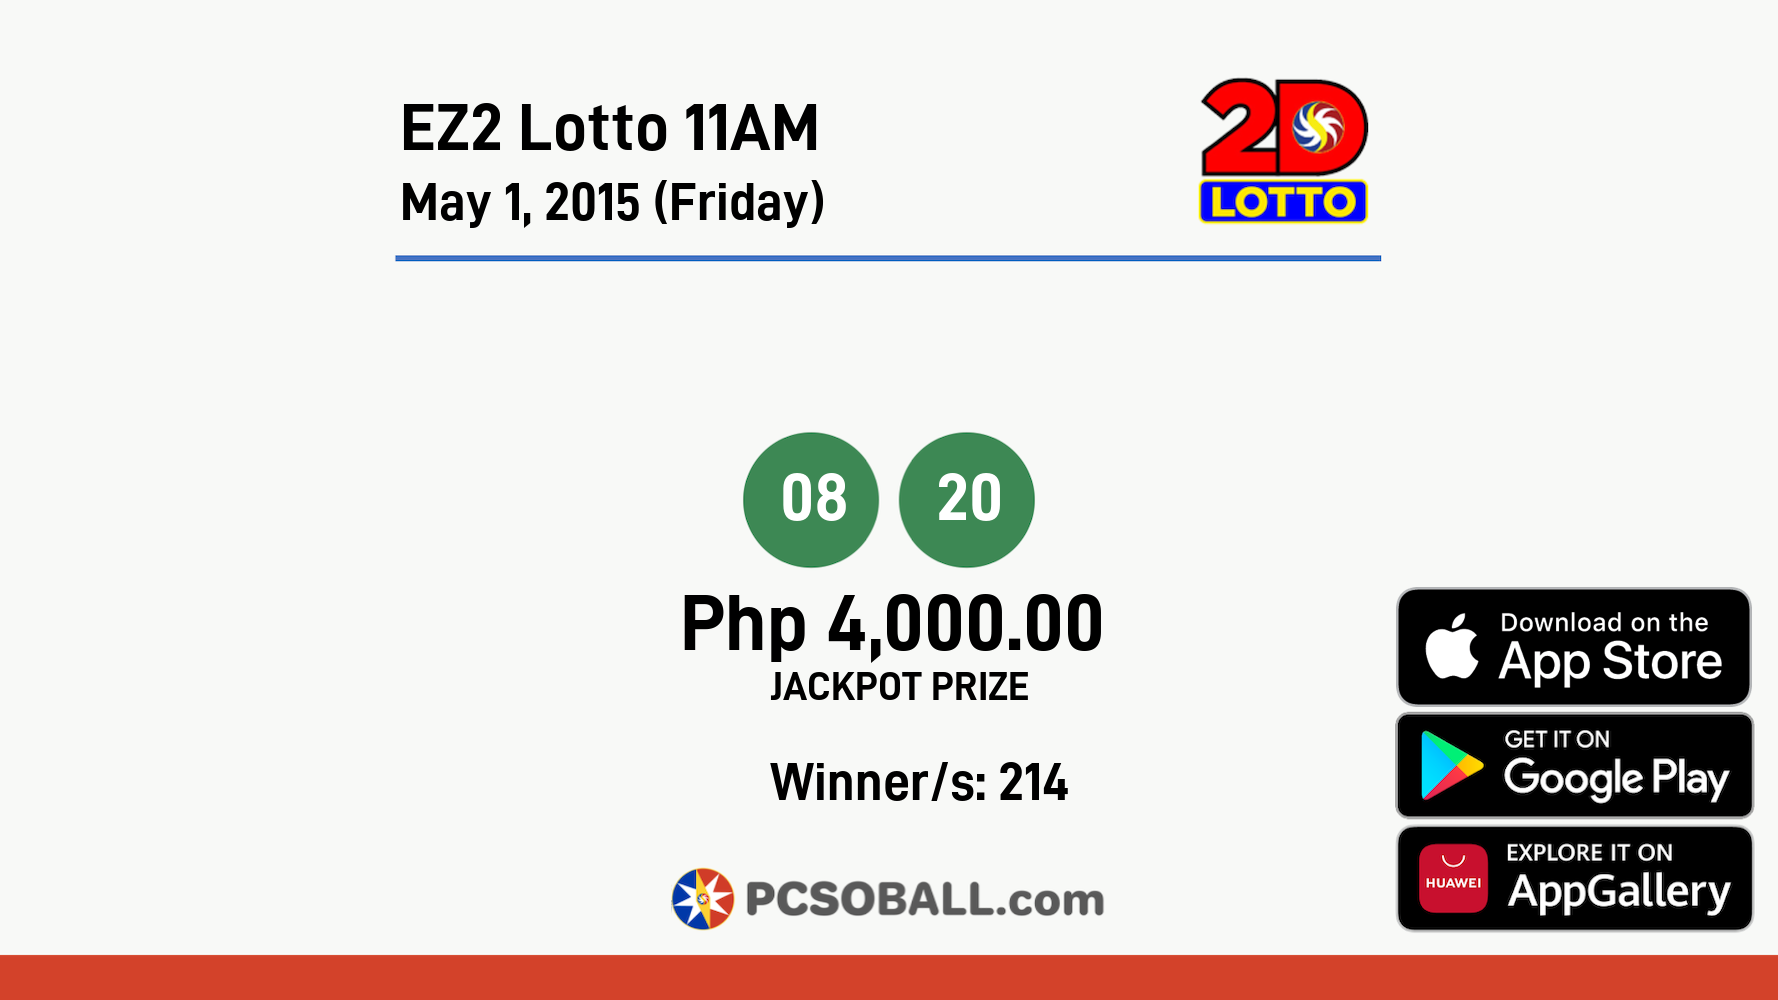 EZ2 Lotto 11AM May 1, 2015 (Friday) Result